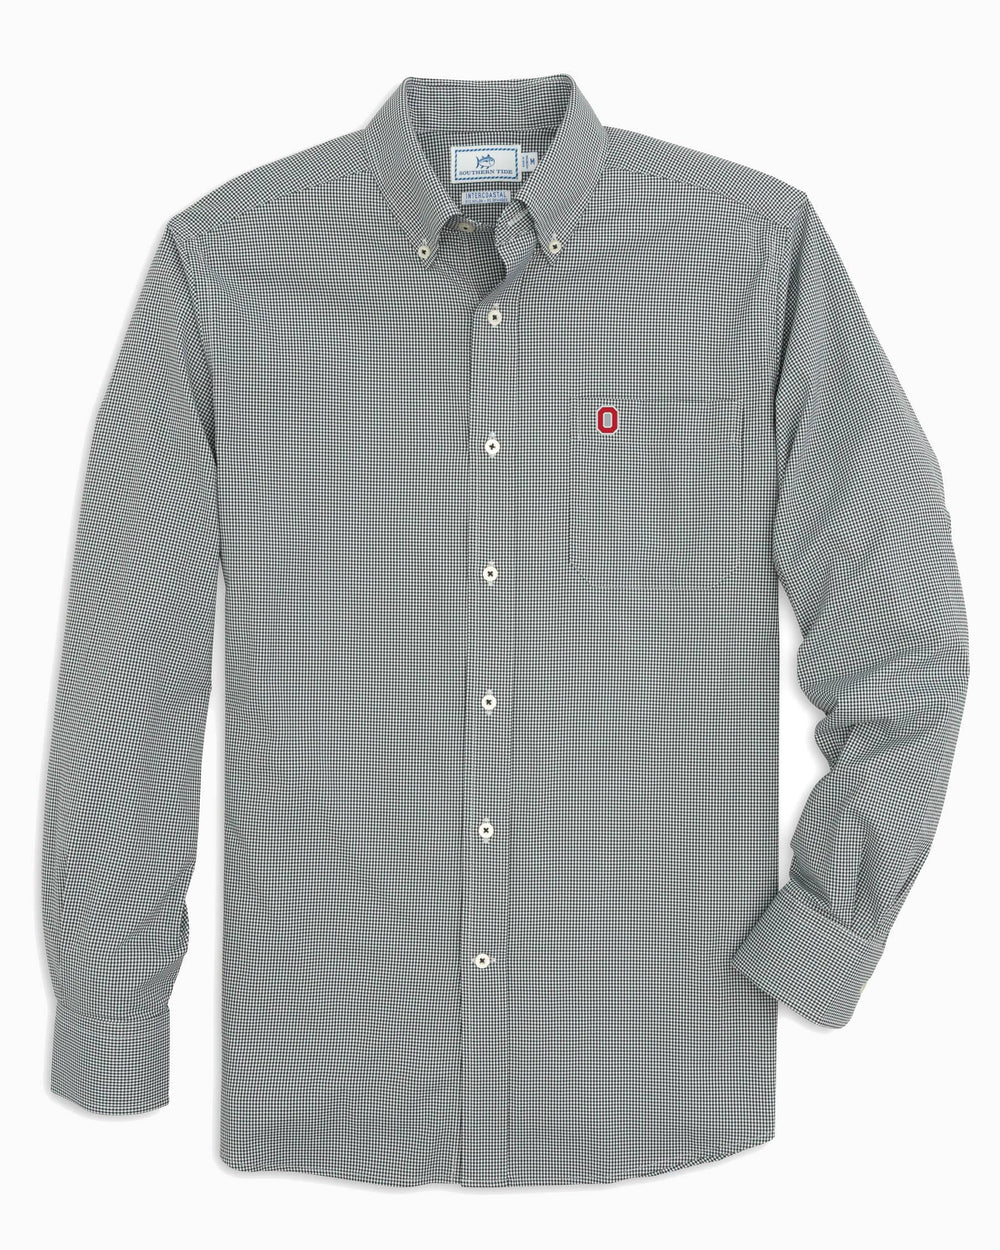 The front view of the Men's Black Ohio State Buckeyes Gingham Button Down Shirt by Southern Tide - Black